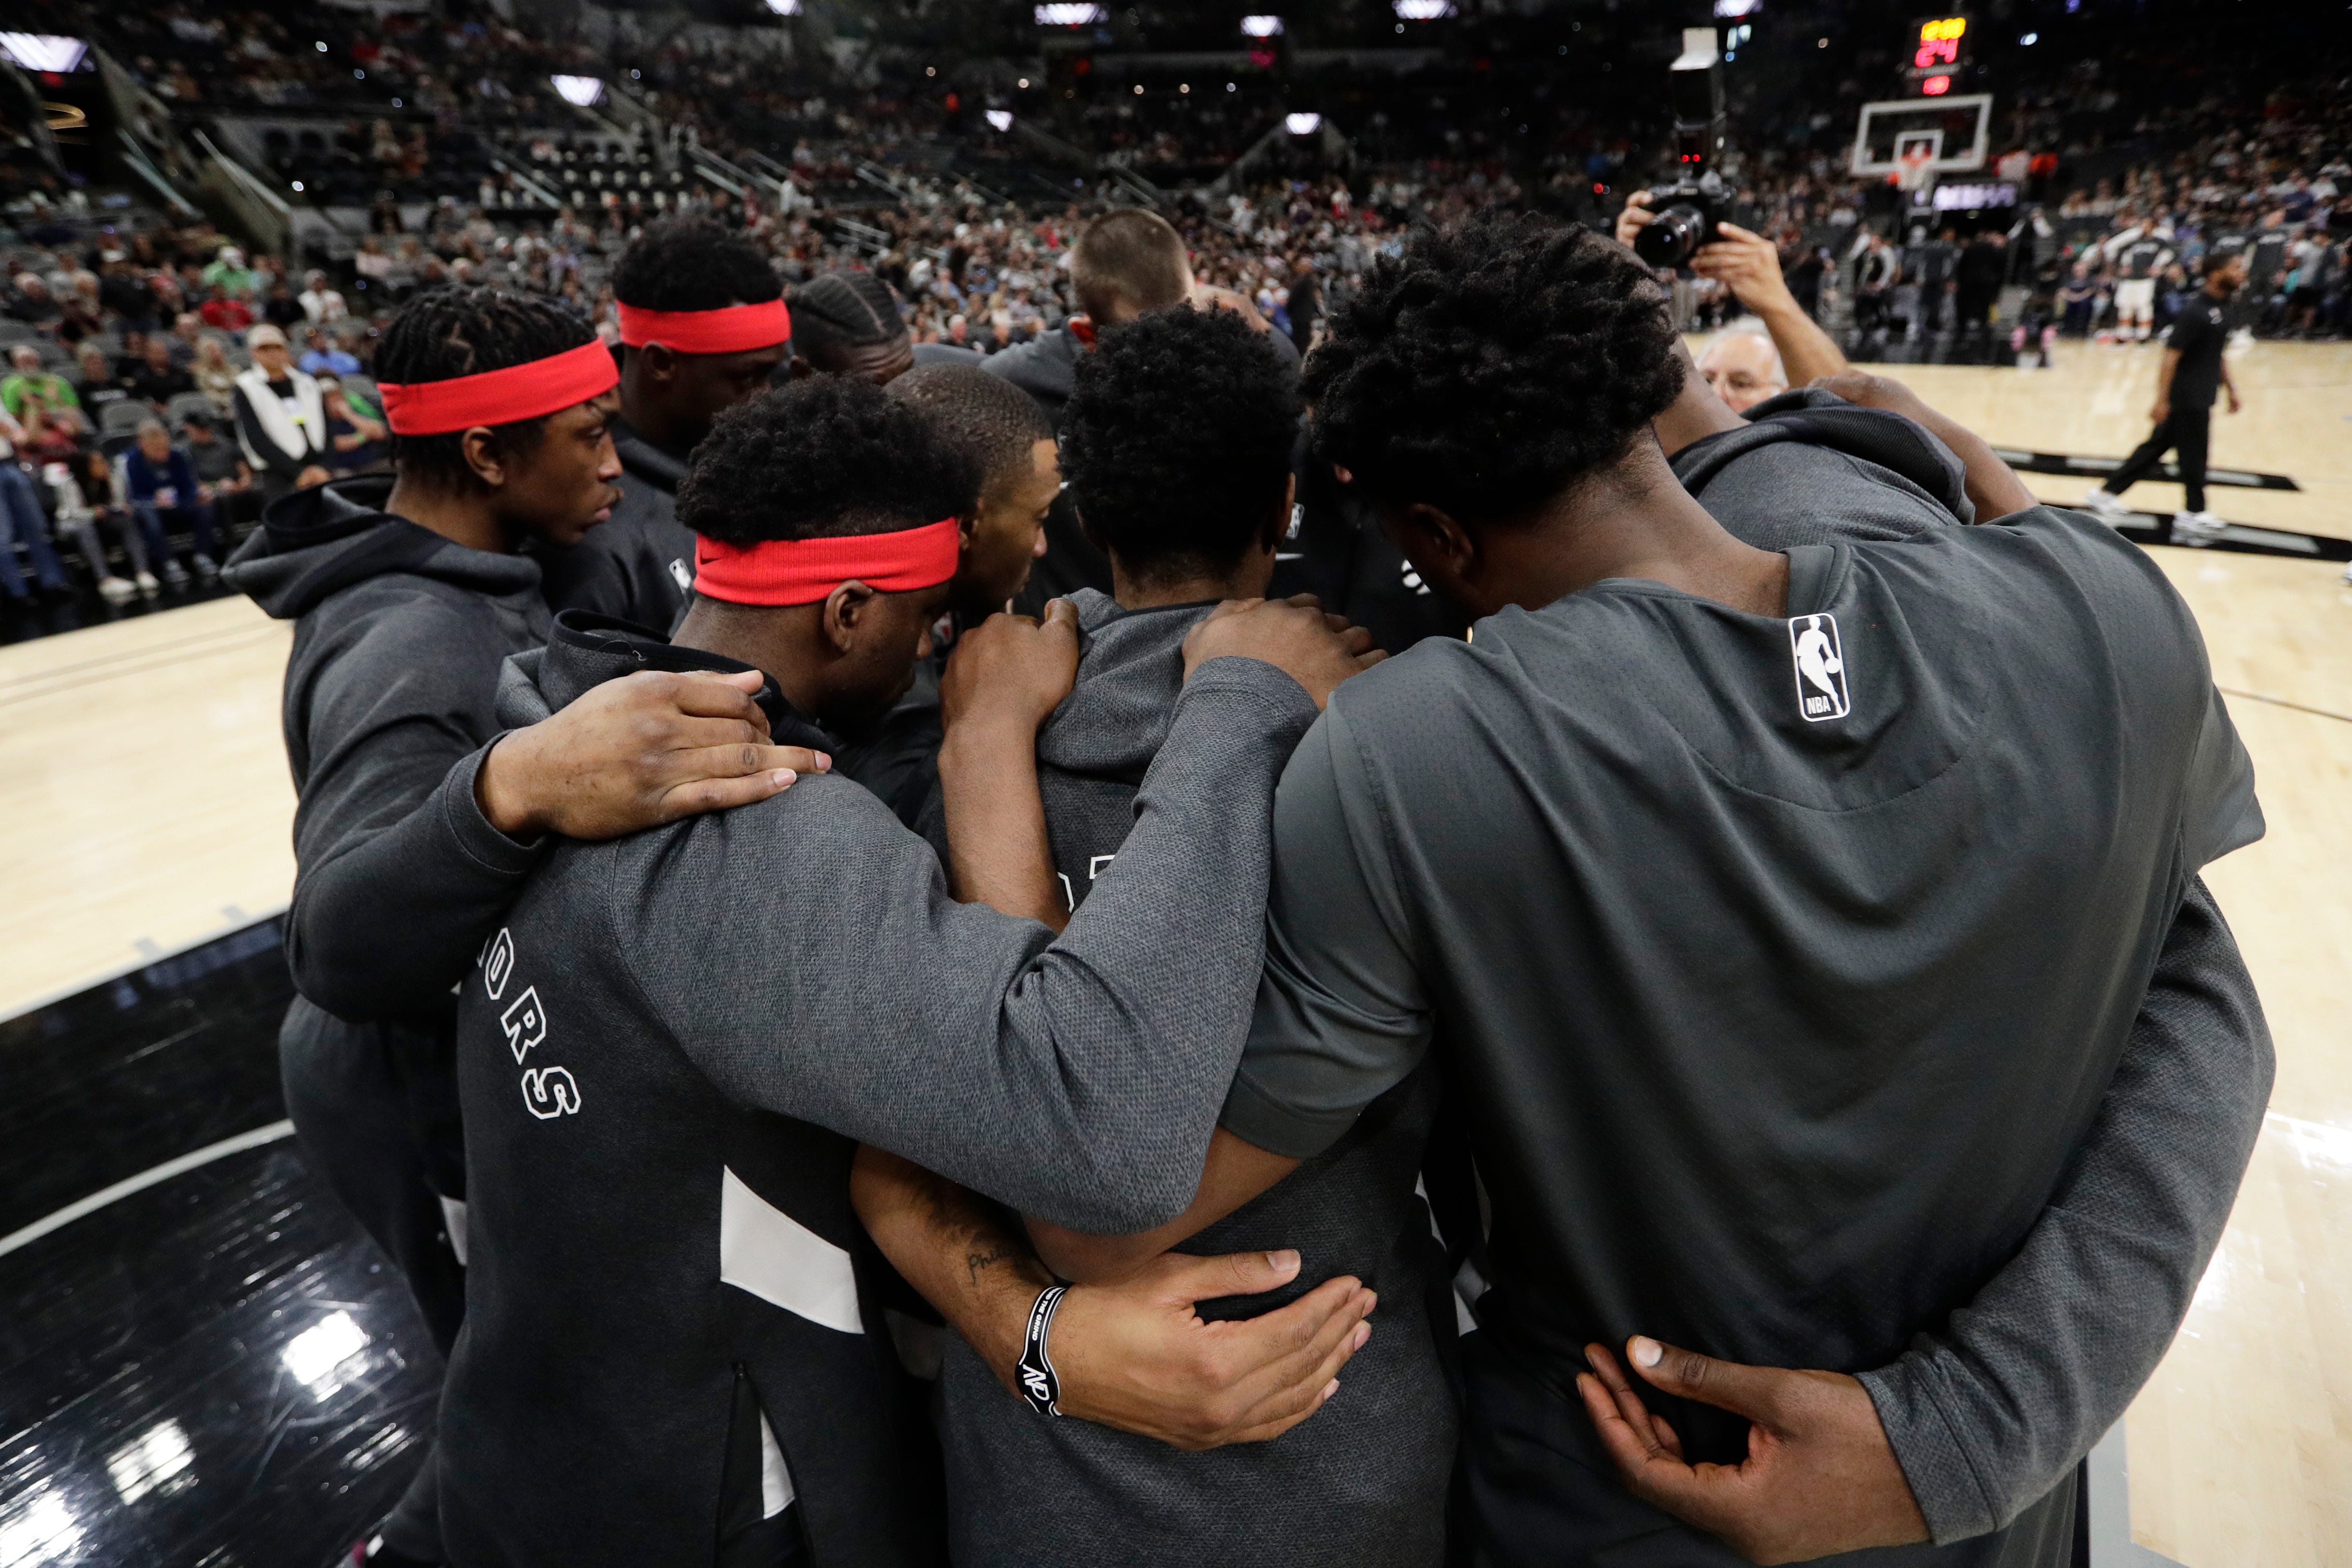 Toronto Raptors players huddle together following a moment of silence for Kobe Bryant.